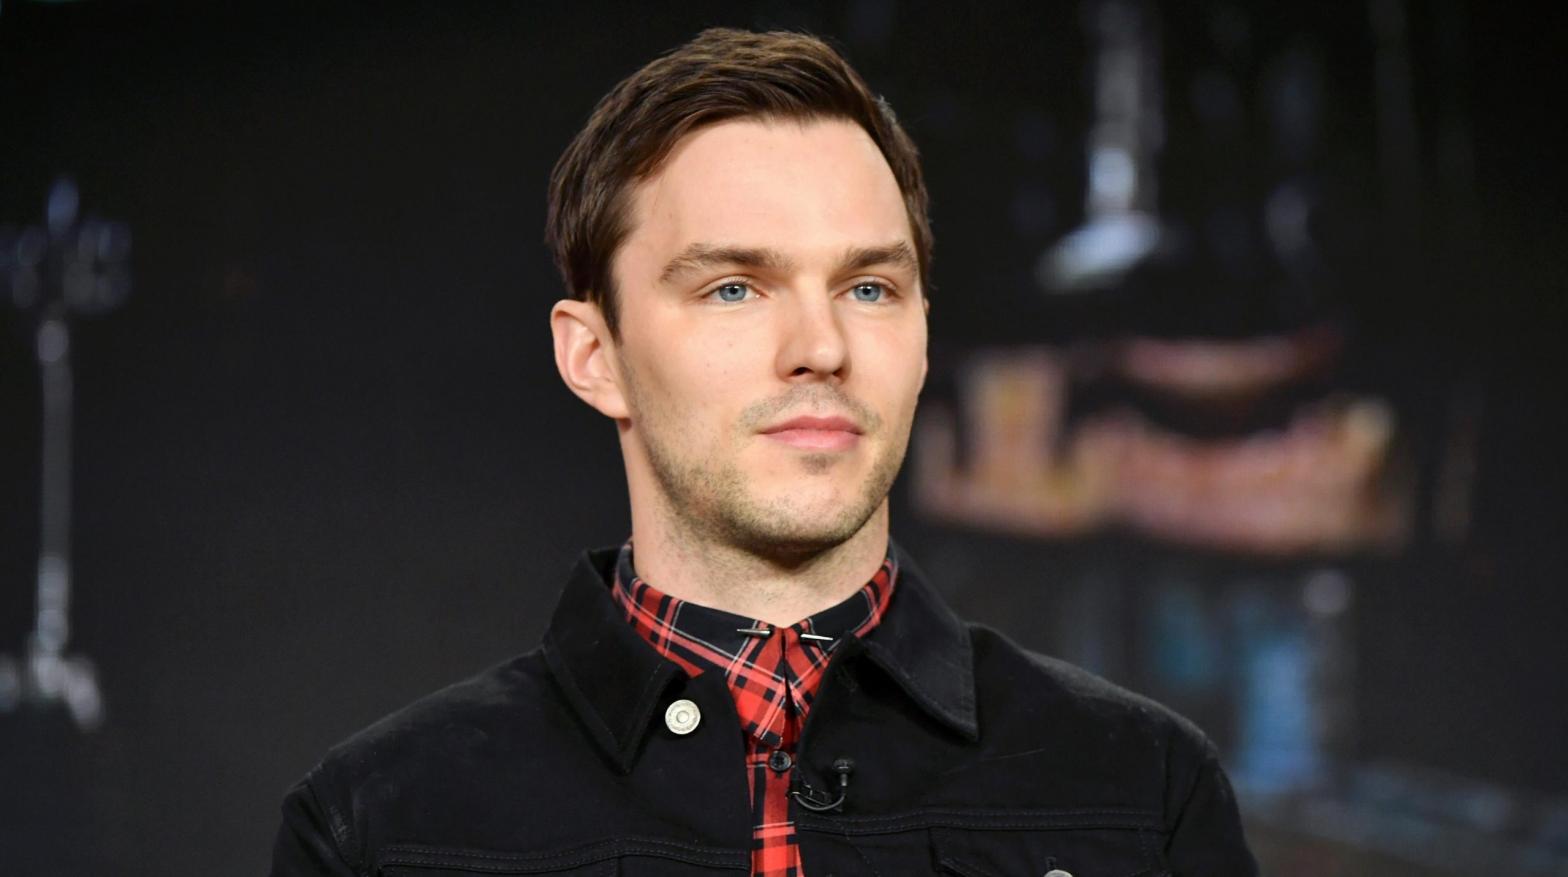 Nicholas Hoult at the 2020 Winter TCA Press Tour on January 17, 2020 in Pasadena, California. (Photo: Amy Sussman, Getty Images)